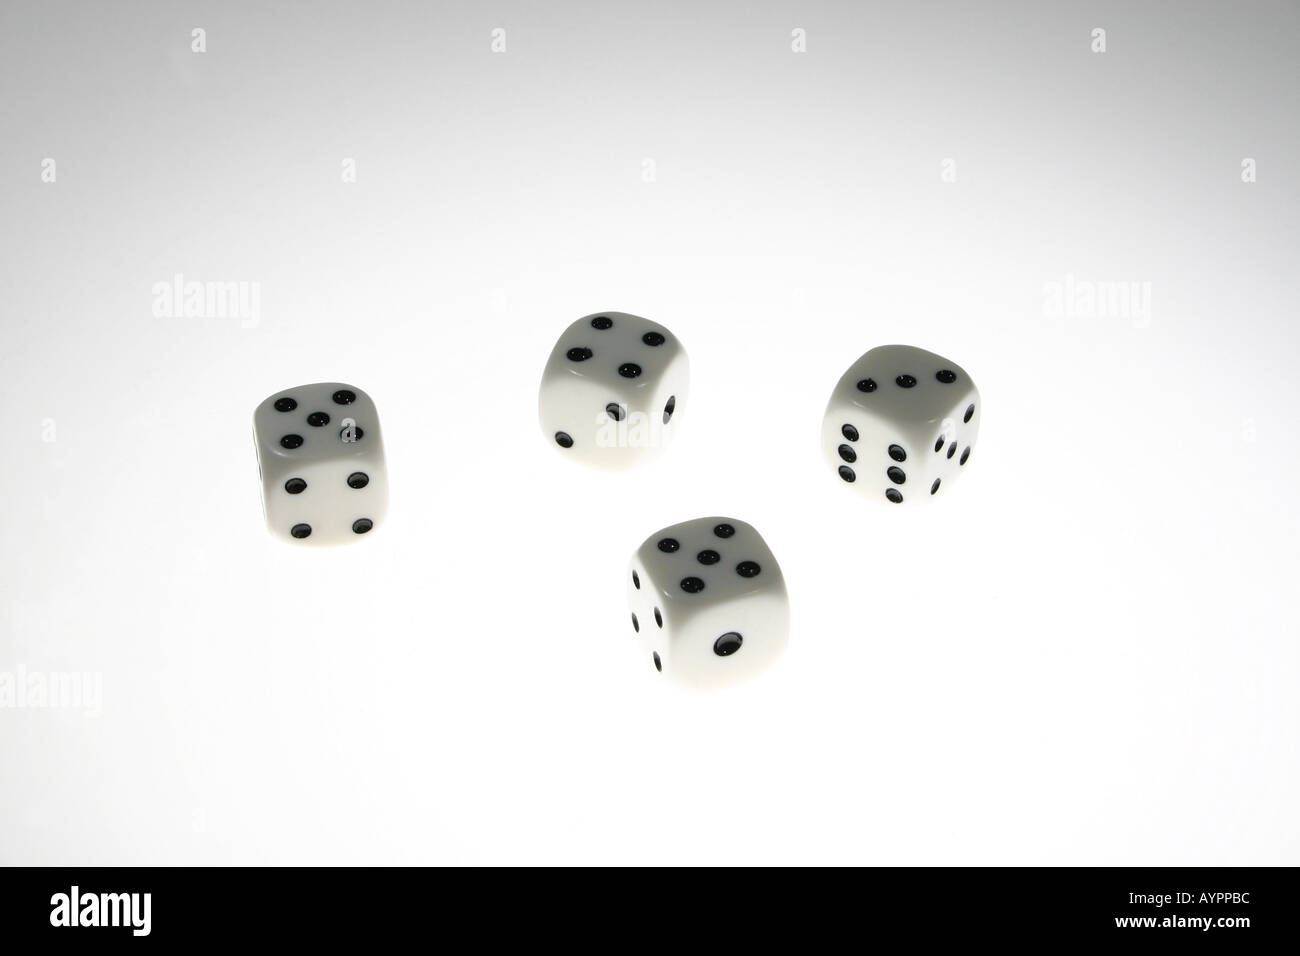 Four dices against a white background Stock Photo